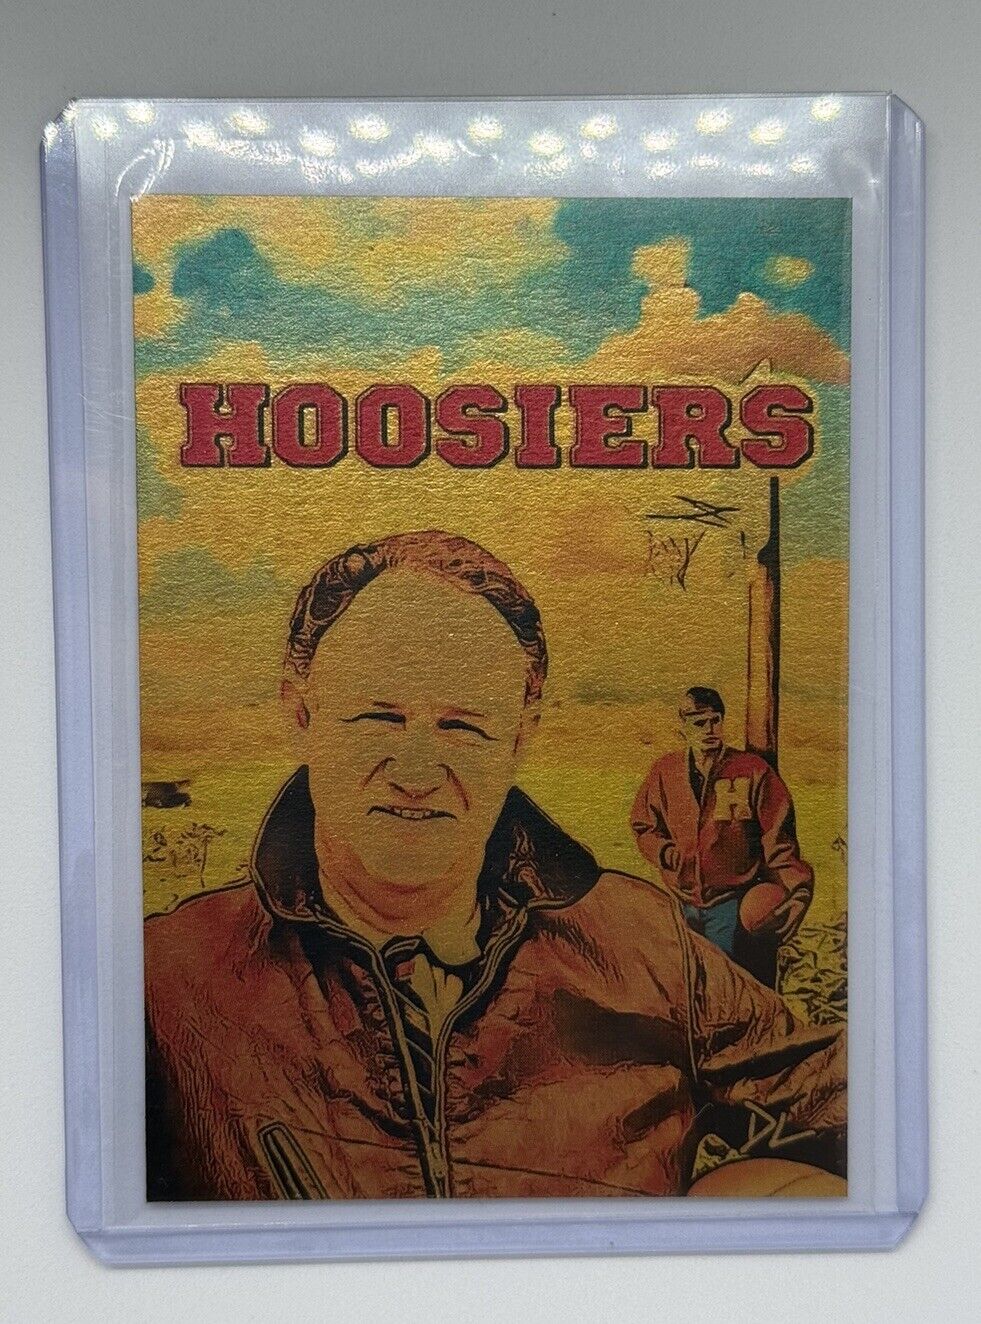 Hoosiers Gold Plated Limited Artist Signed “Gene Hackman” Trading Card 1/1